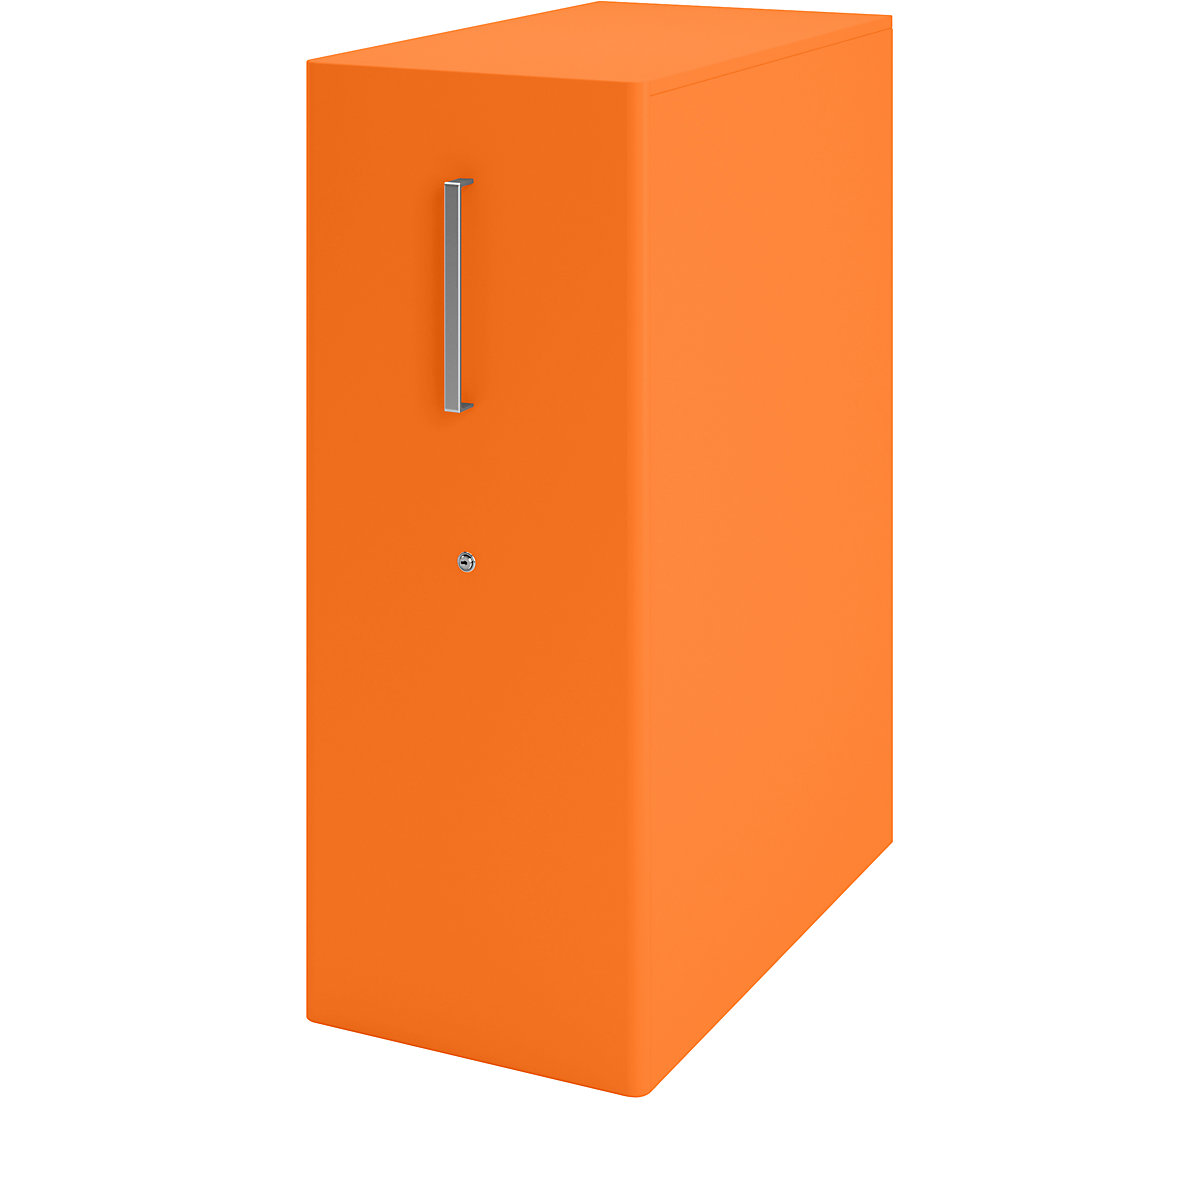 Tower™ 4 add-on furniture, with worktop – BISLEY, for the right side, 3 shelves, orange-15